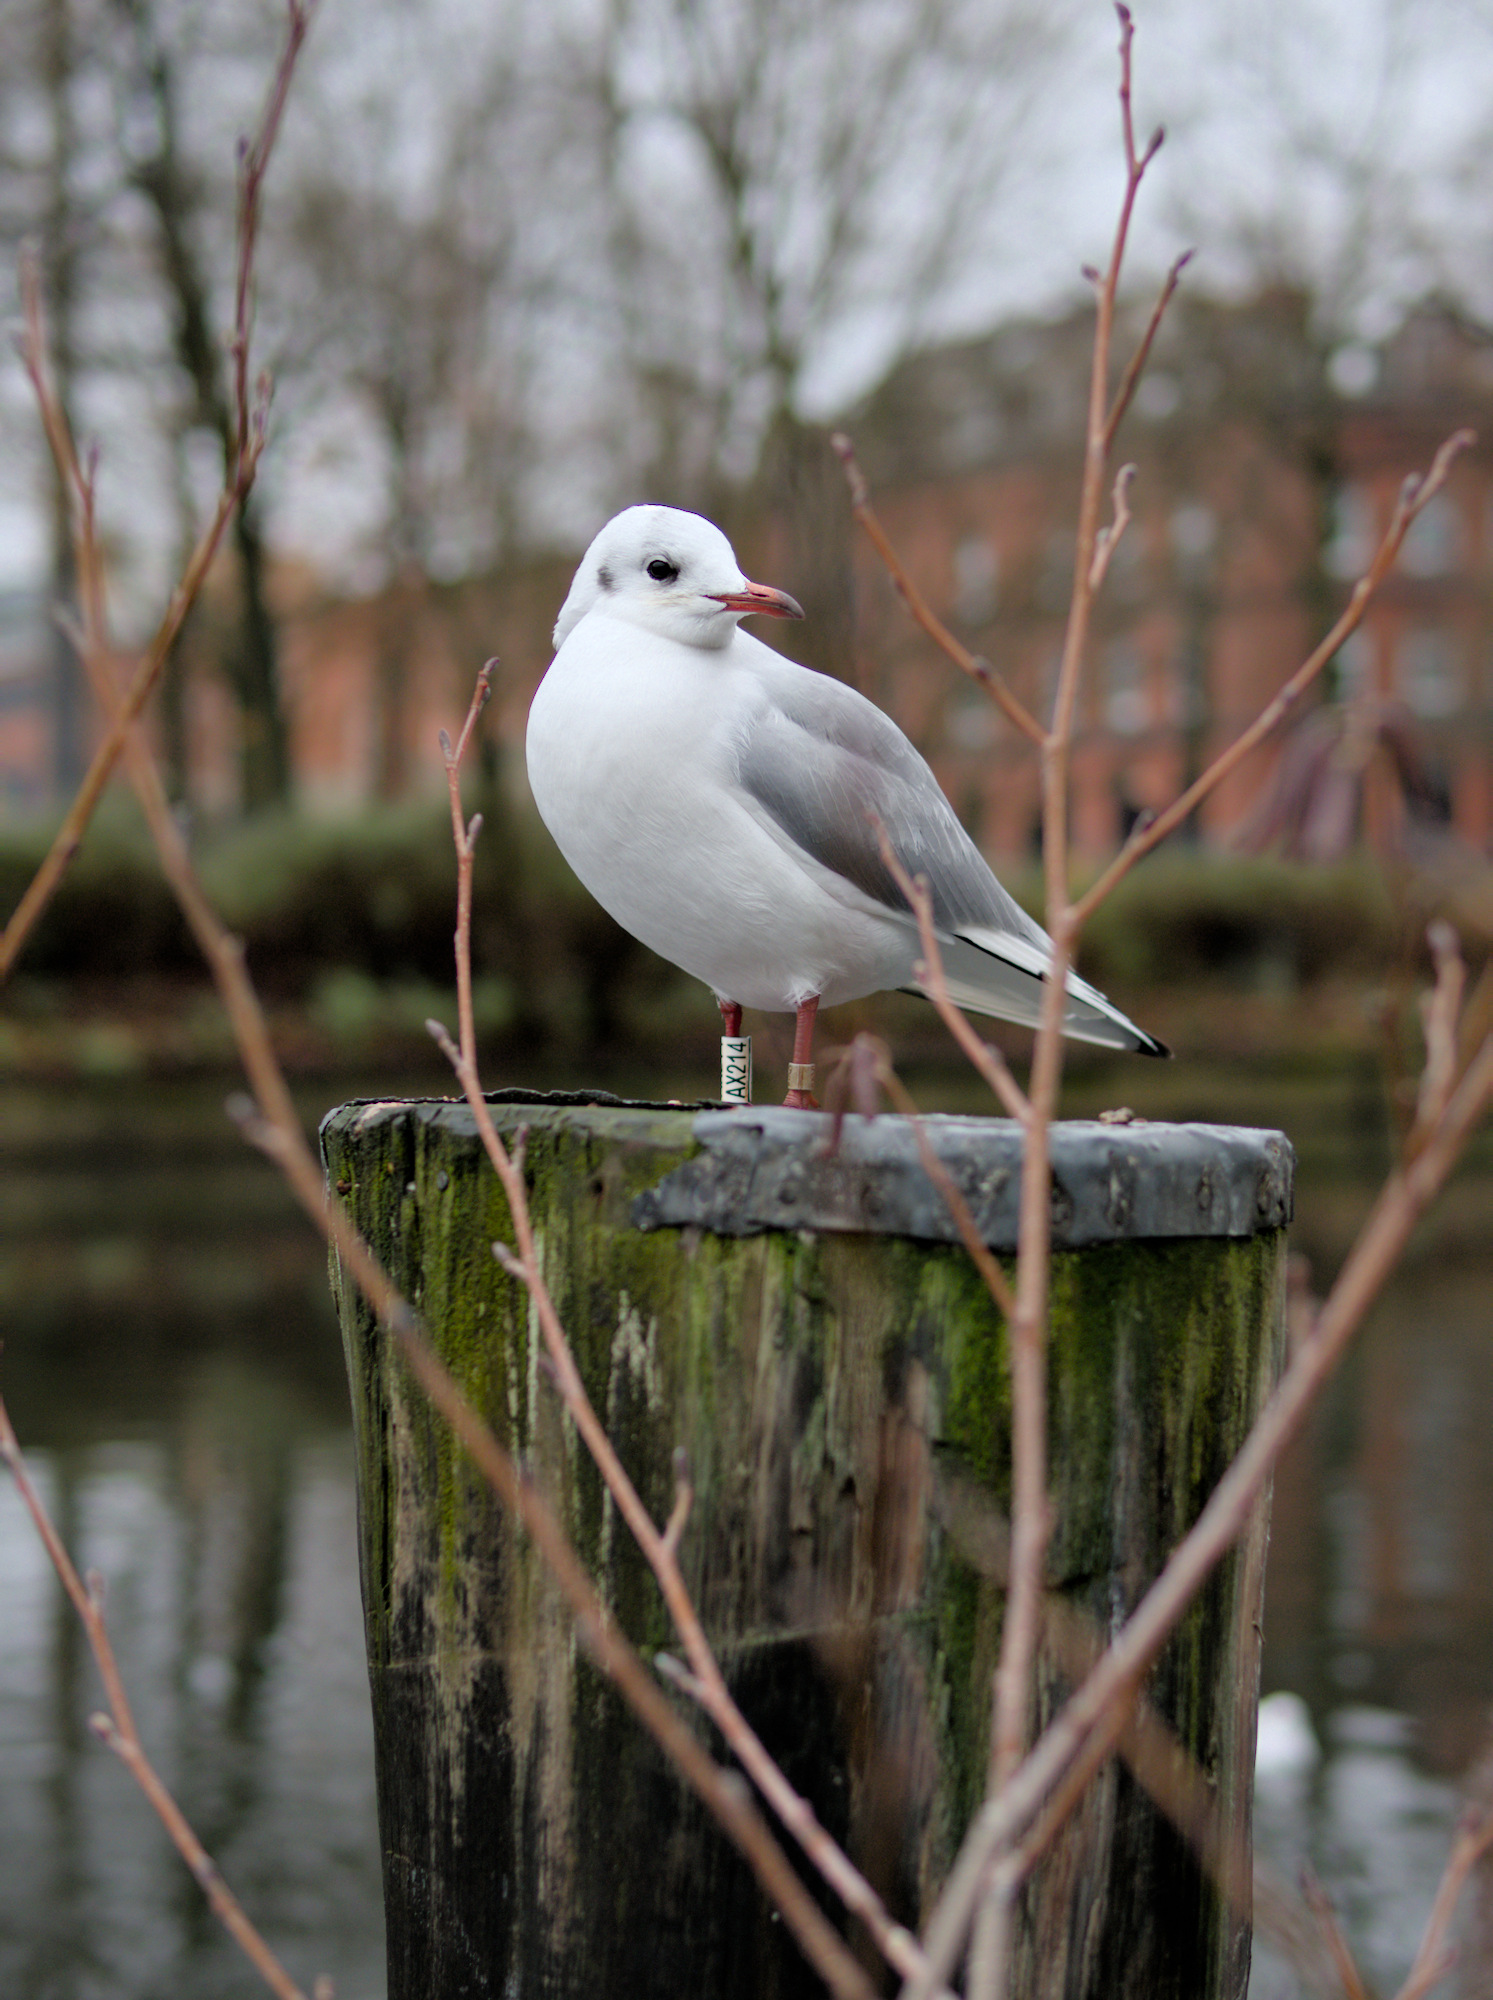 A black-headed gull in winter (white-headed) plumage stands on a post with buildings in the background